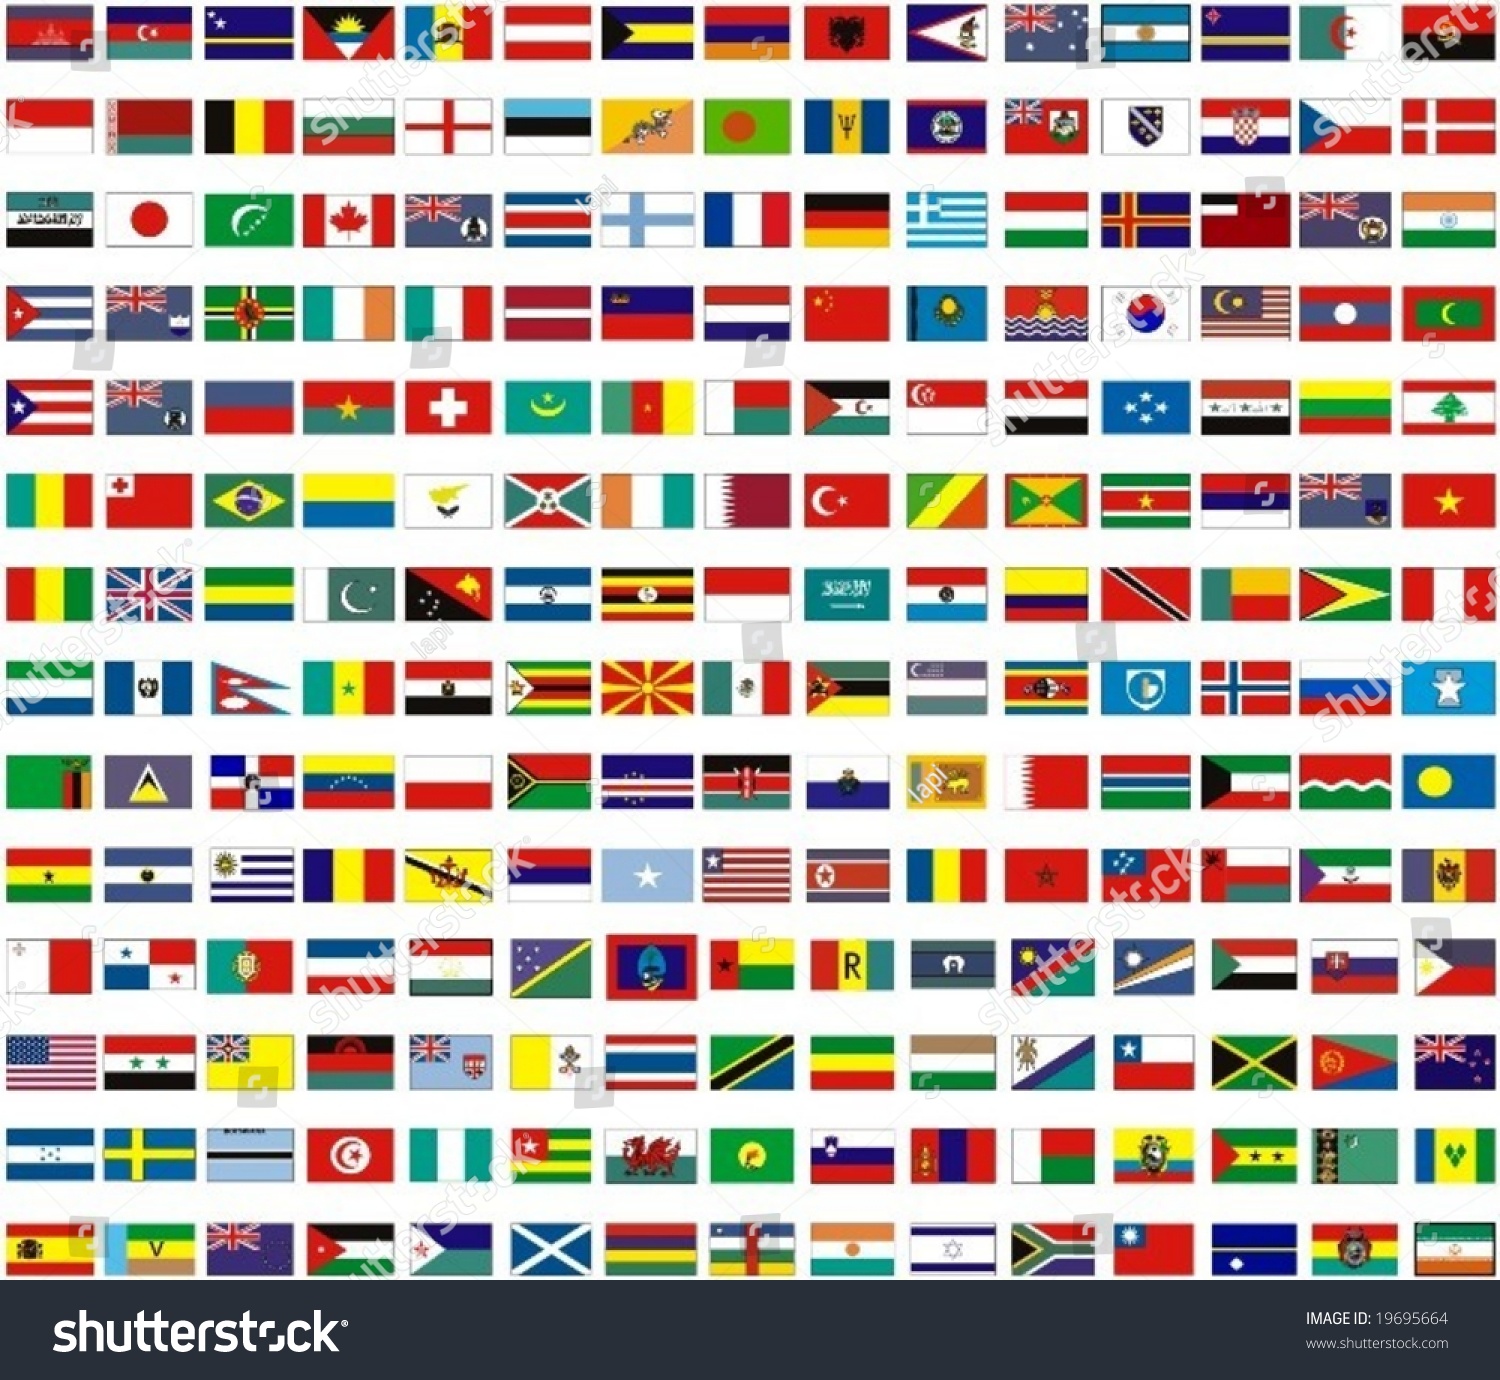 Flags Of All Countries Of The World Stock Vector Illustration 19695664 ...